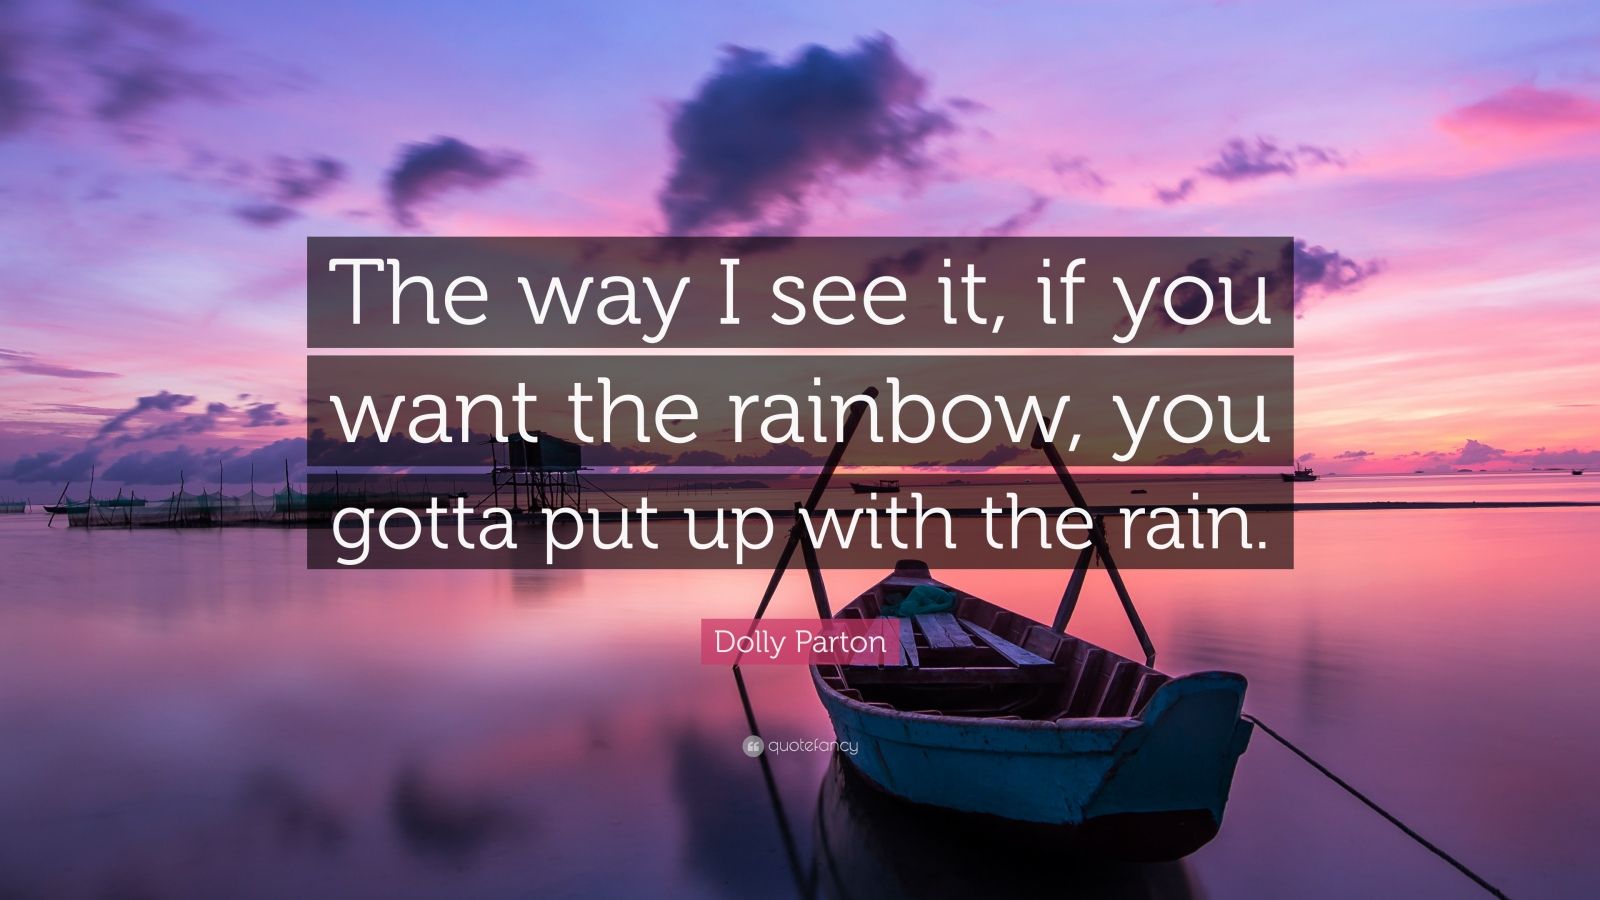 Dolly Parton Quote: “The way I see it, if you want the rainbow, you